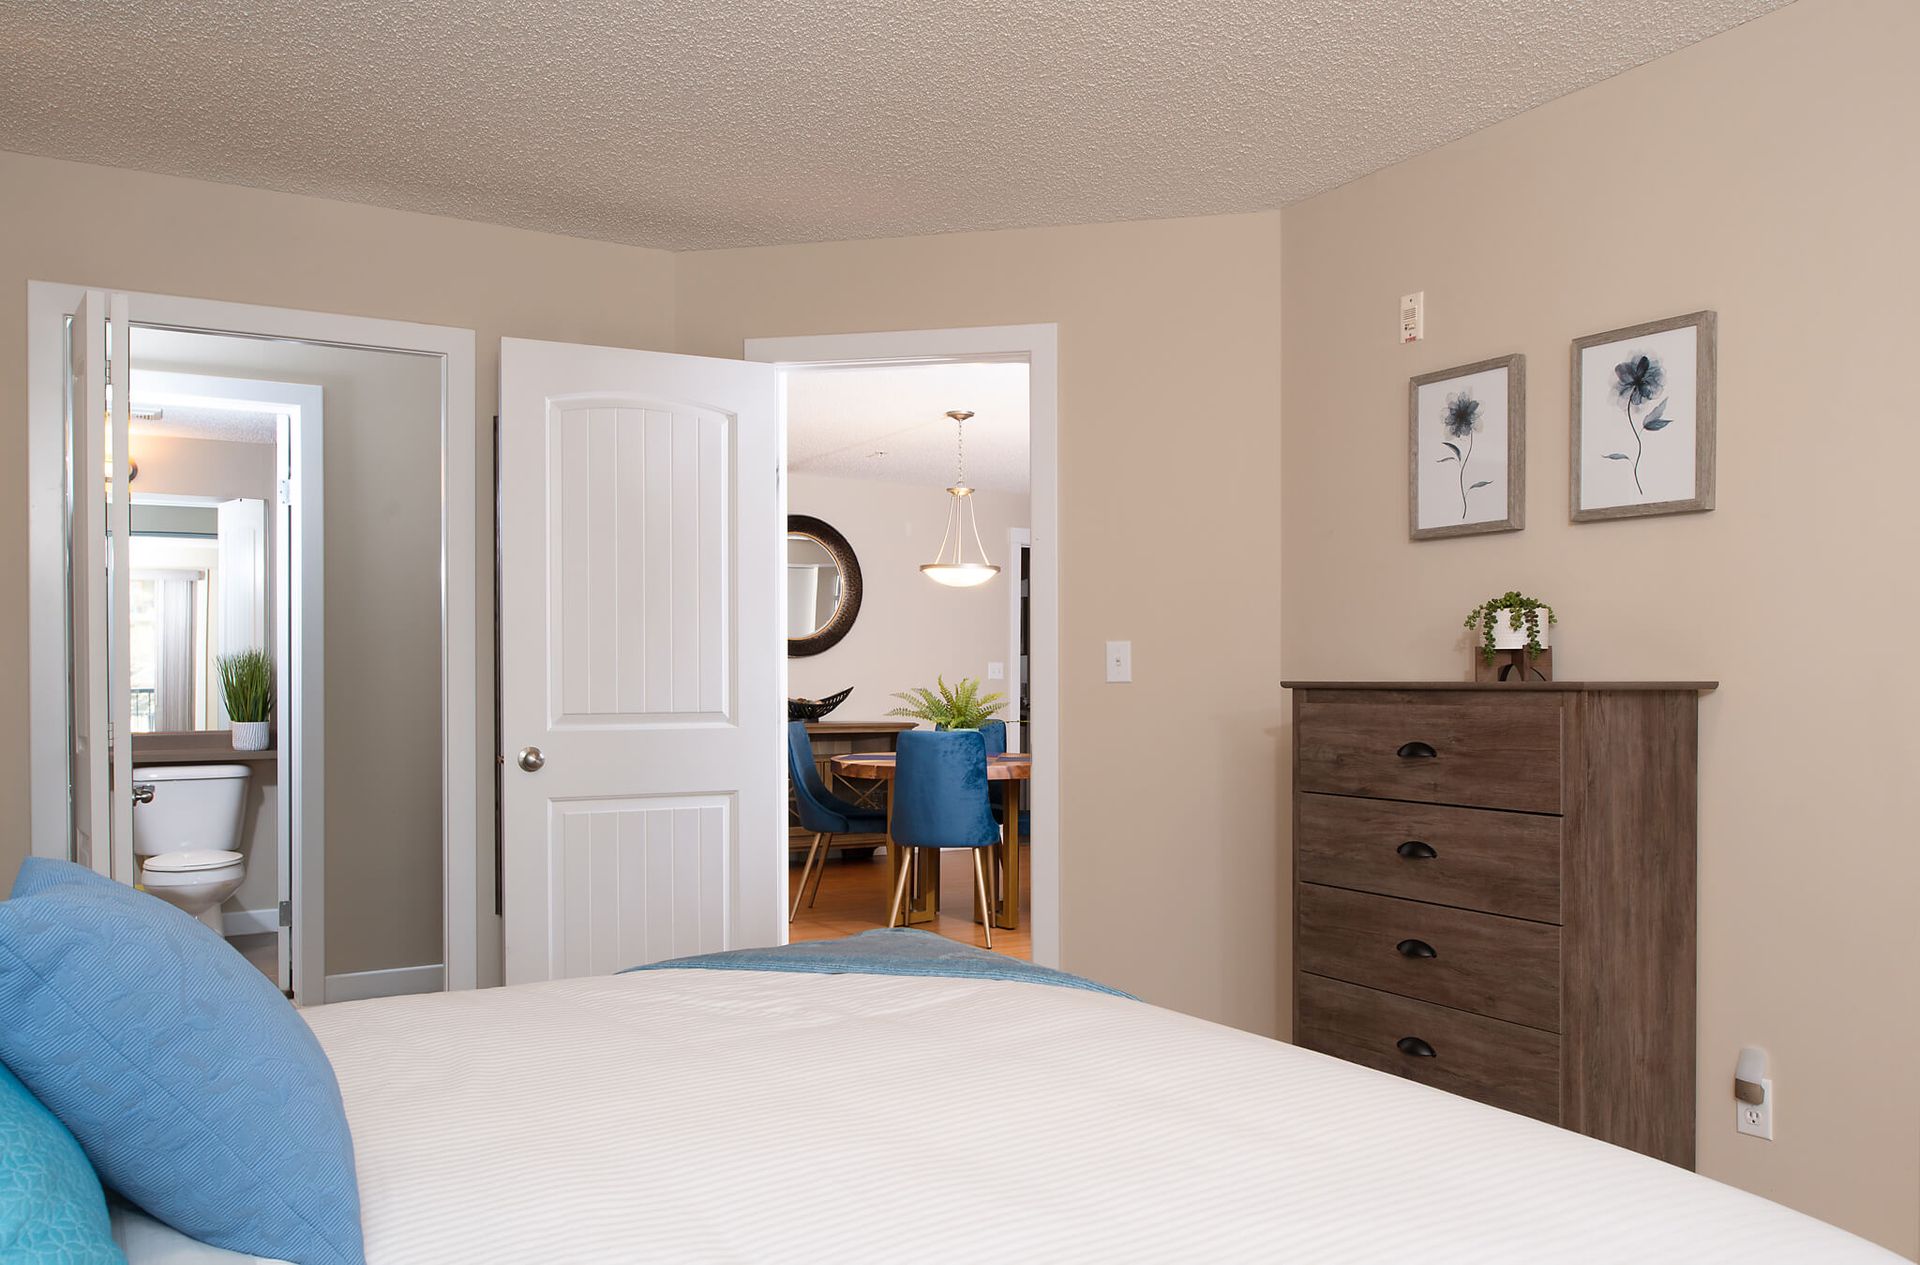 Primary bedroom of the Lakefront condo at Lake Windermere Pointe BC Vacation Rental hosted by Aisling Baile Property Management.